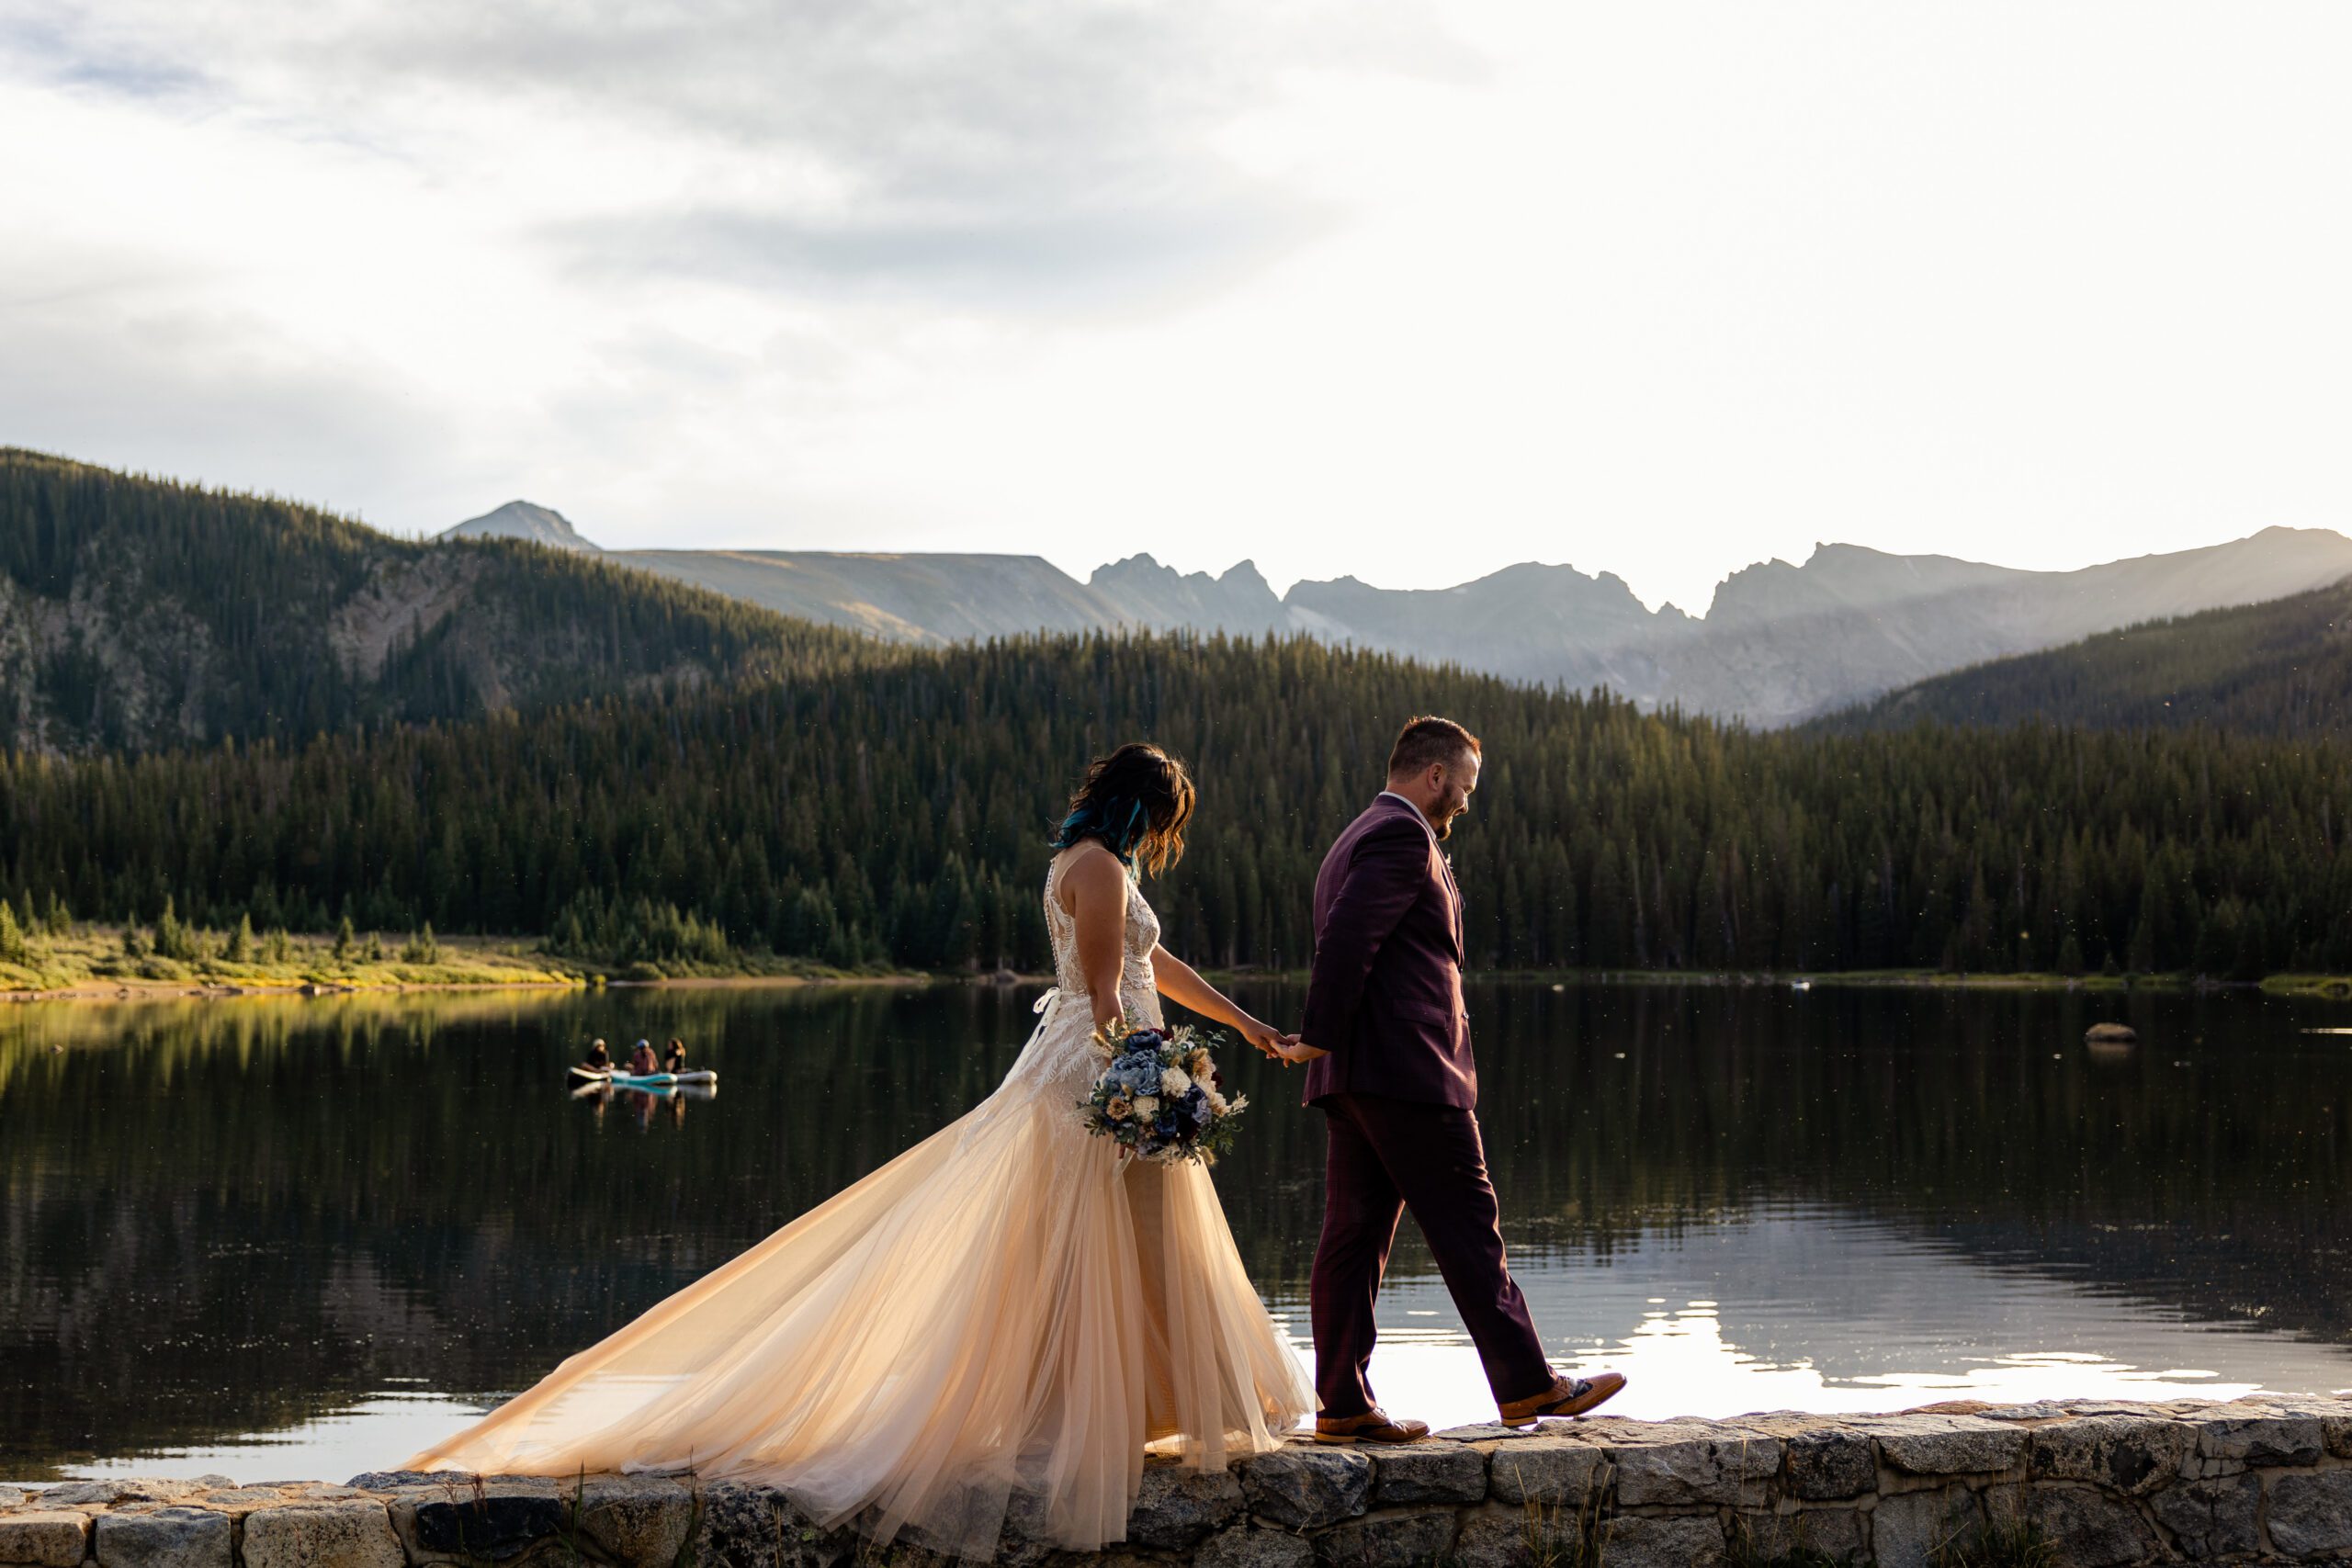 The bride and groom walk above the lake on a cozy ledge during their Brainard Lake Elopement.